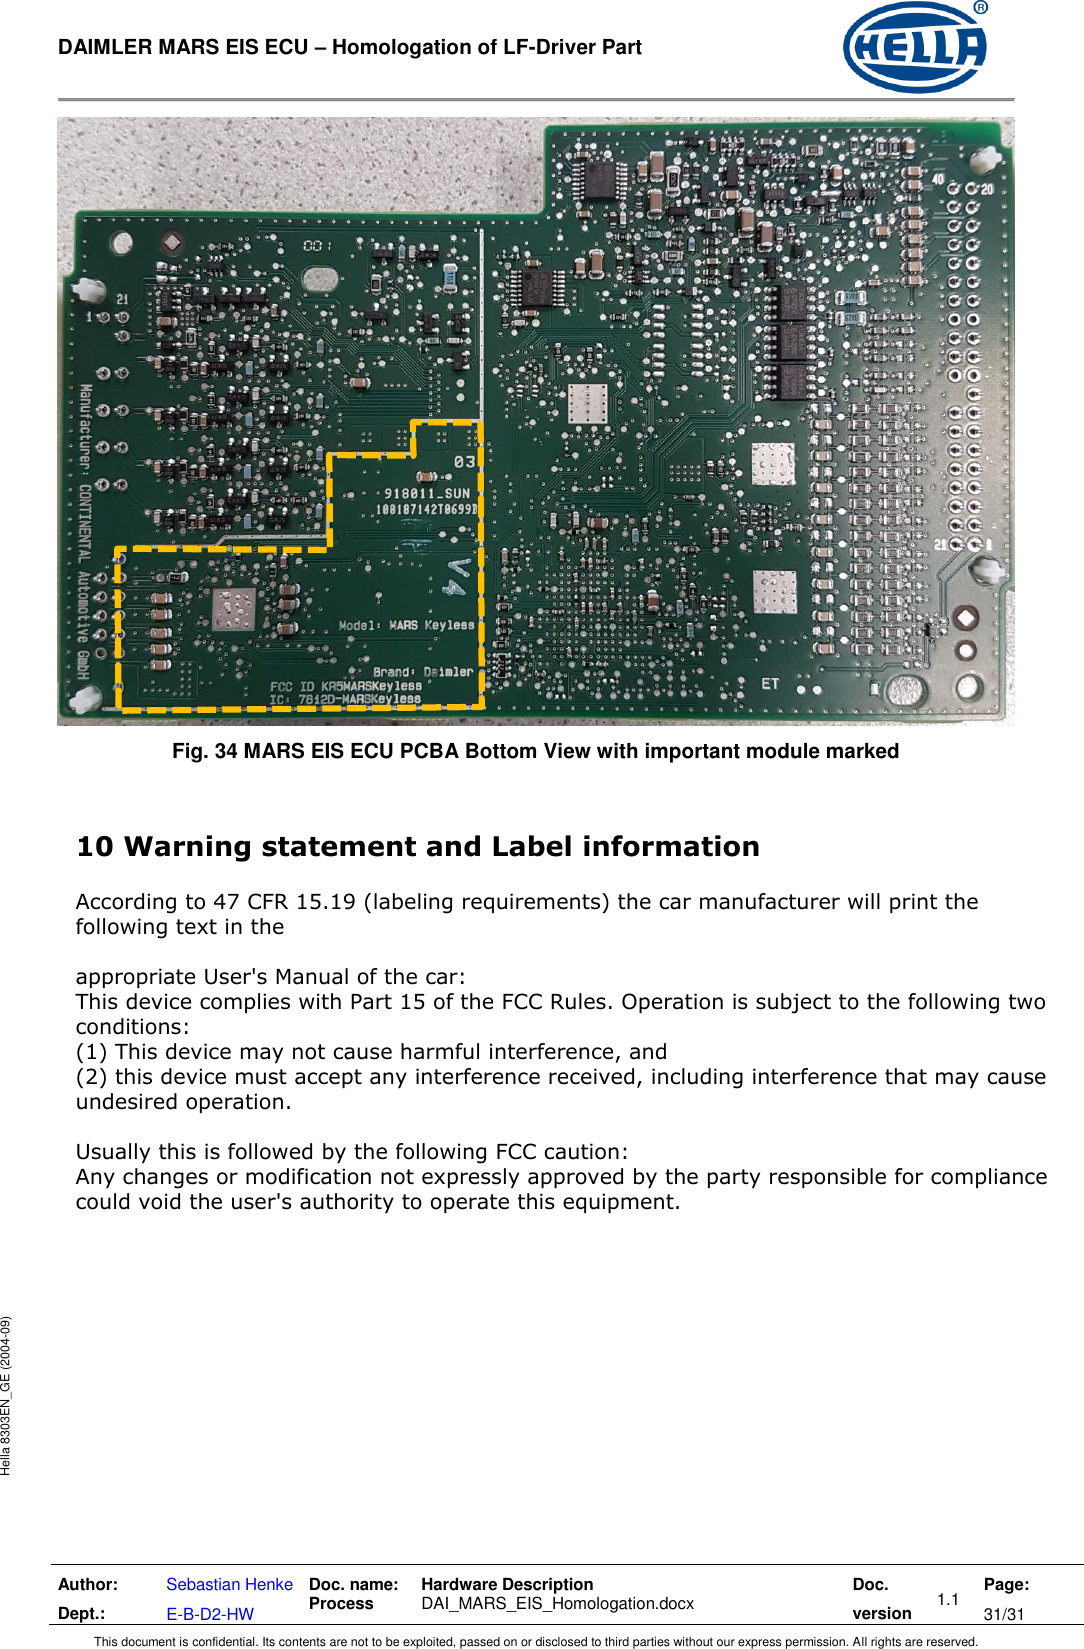  DAIMLER MARS EIS ECU – Homologation of LF-Driver Part   Author: Dept.: Sebastian Henke E-B-D2-HW Doc. name: Process Hardware Description  DAI_MARS_EIS_Homologation.docx Doc. version 1.1 Page: 31/31 This document is confidential. Its contents are not to be exploited, passed on or disclosed to third parties without our express permission. All rights are reserved. Hella 8303EN_GE (2004-09)  Fig. 34 MARS EIS ECU PCBA Bottom View with important module marked  10 Warning statement and Label information   According to 47 CFR 15.19 (labeling requirements) the car manufacturer will print the following text in the   appropriate User&apos;s Manual of the car:  This device complies with Part 15 of the FCC Rules. Operation is subject to the following two  conditions:  (1) This device may not cause harmful interference, and  (2) this device must accept any interference received, including interference that may cause undesired operation.   Usually this is followed by the following FCC caution:  Any changes or modification not expressly approved by the party responsible for compliance  could void the user&apos;s authority to operate this equipment. 